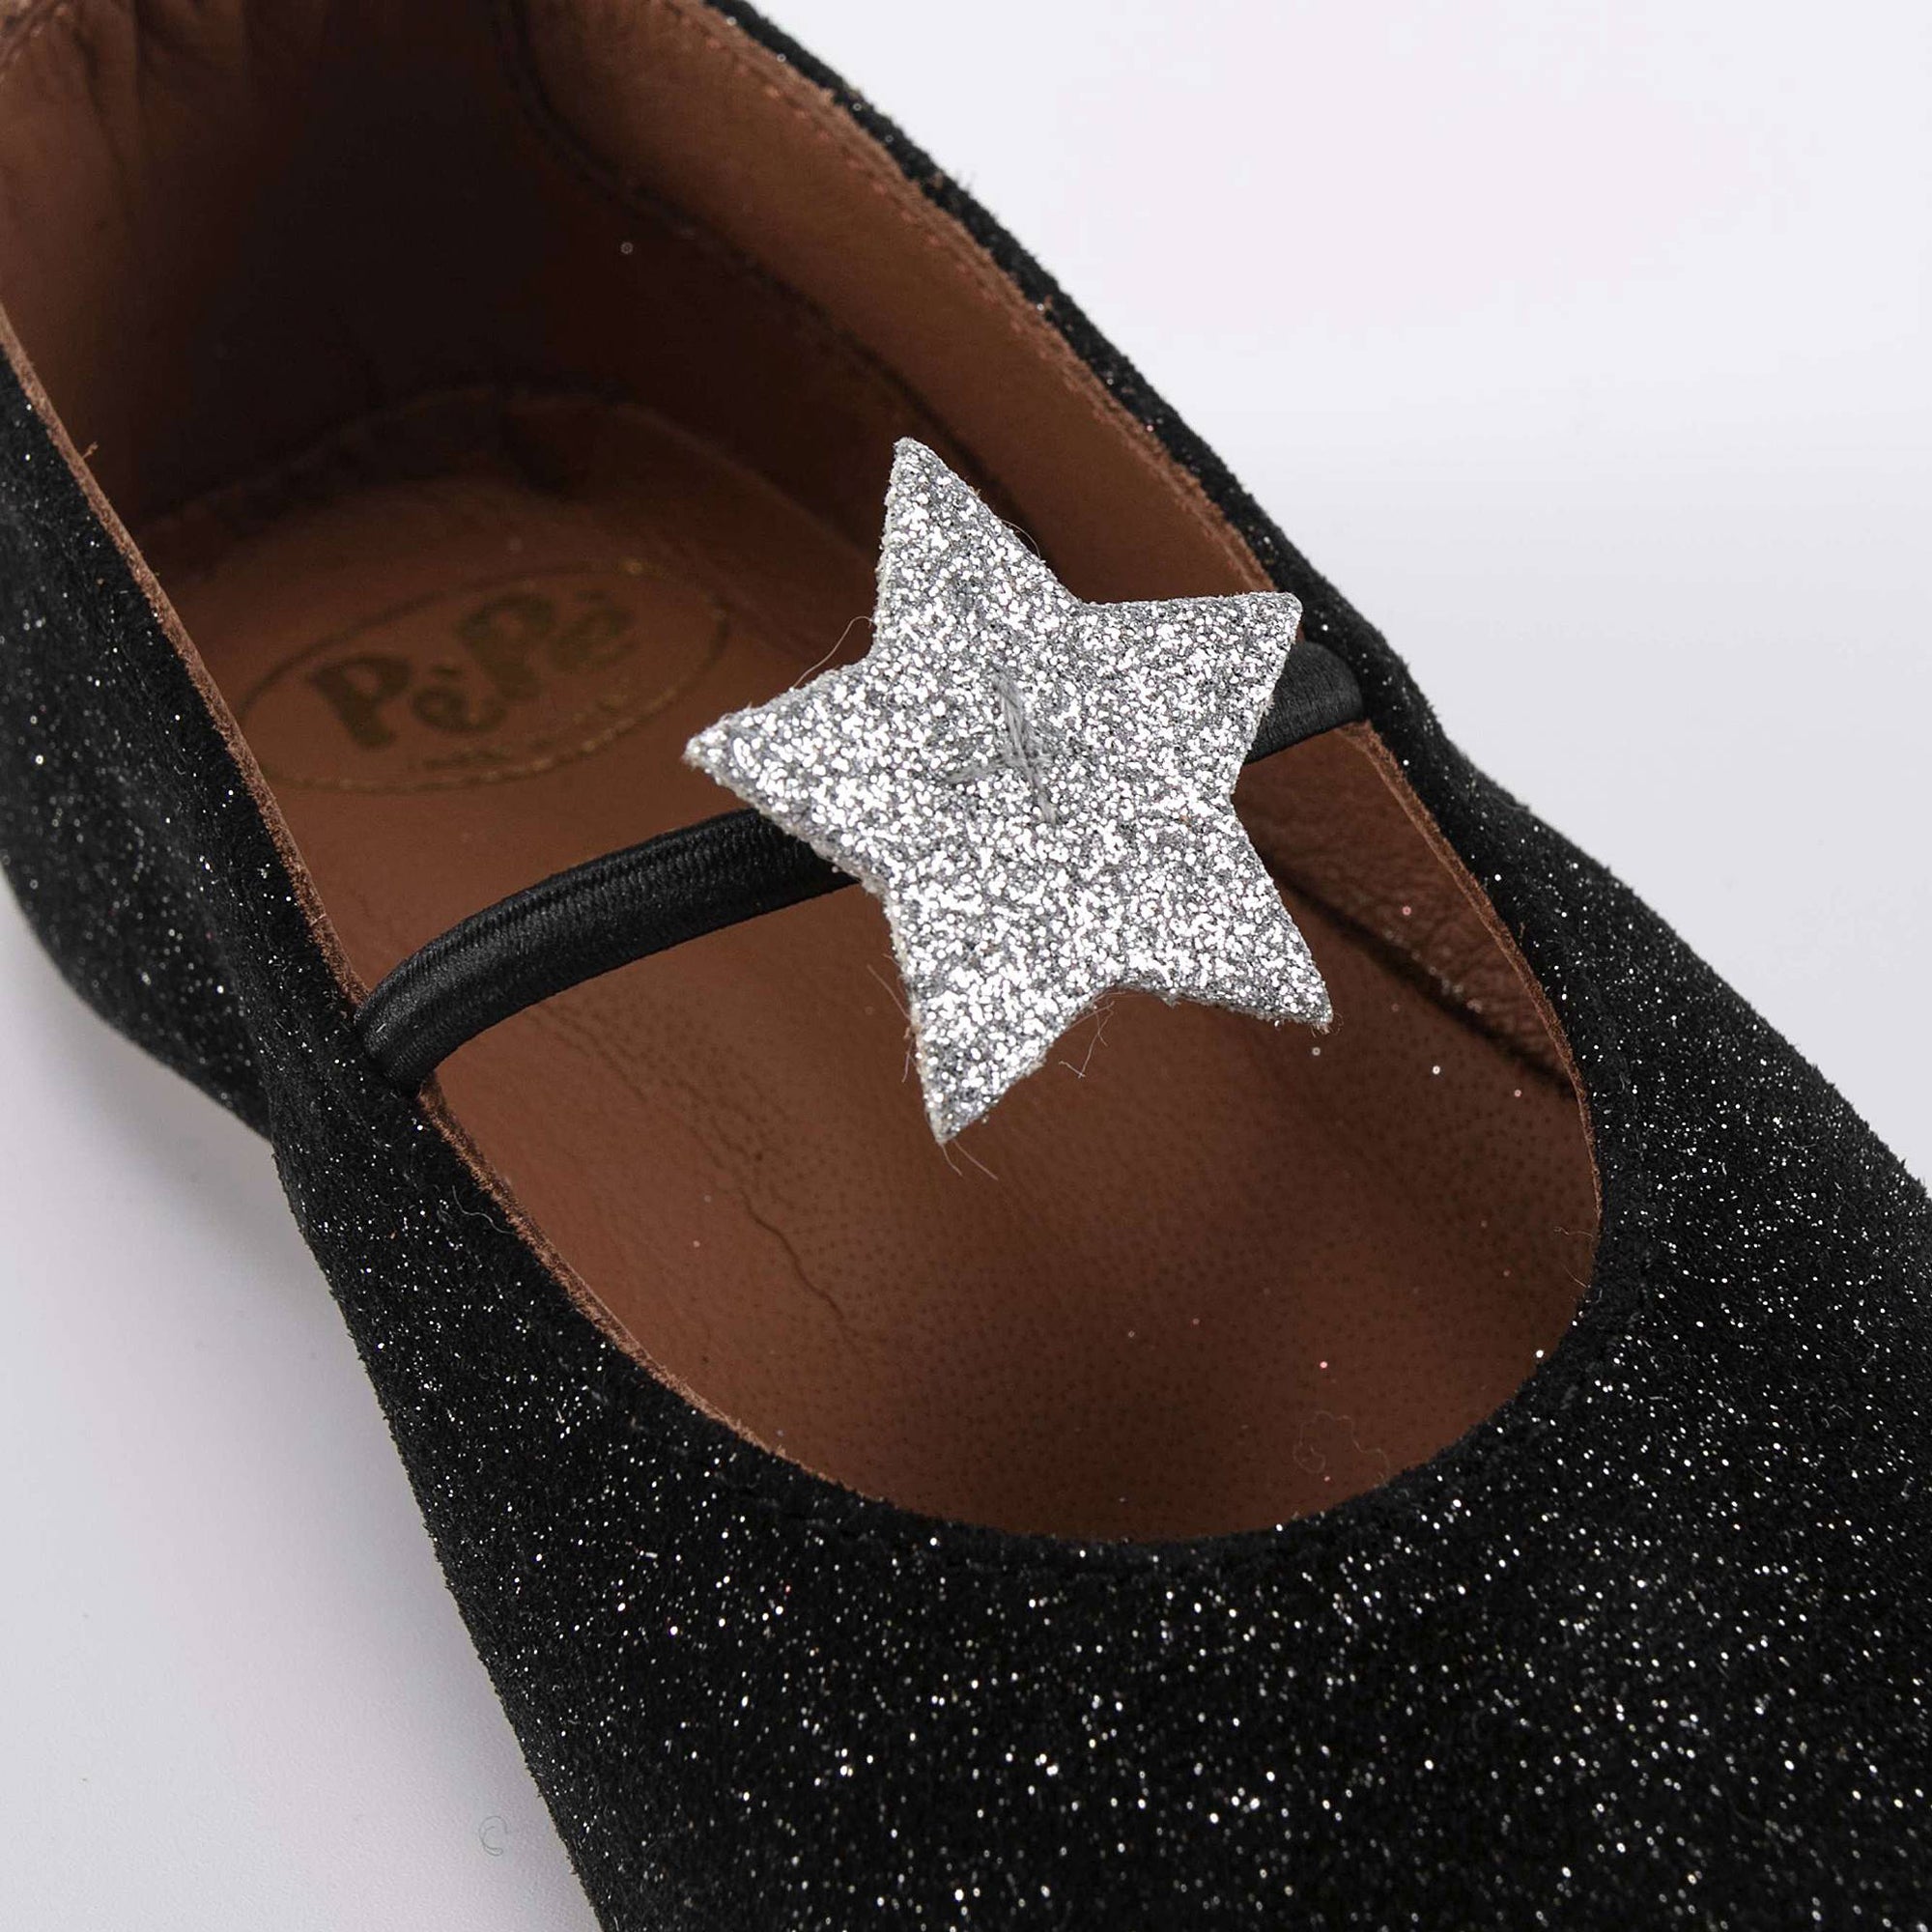 Girls Black Star Leather Shoes